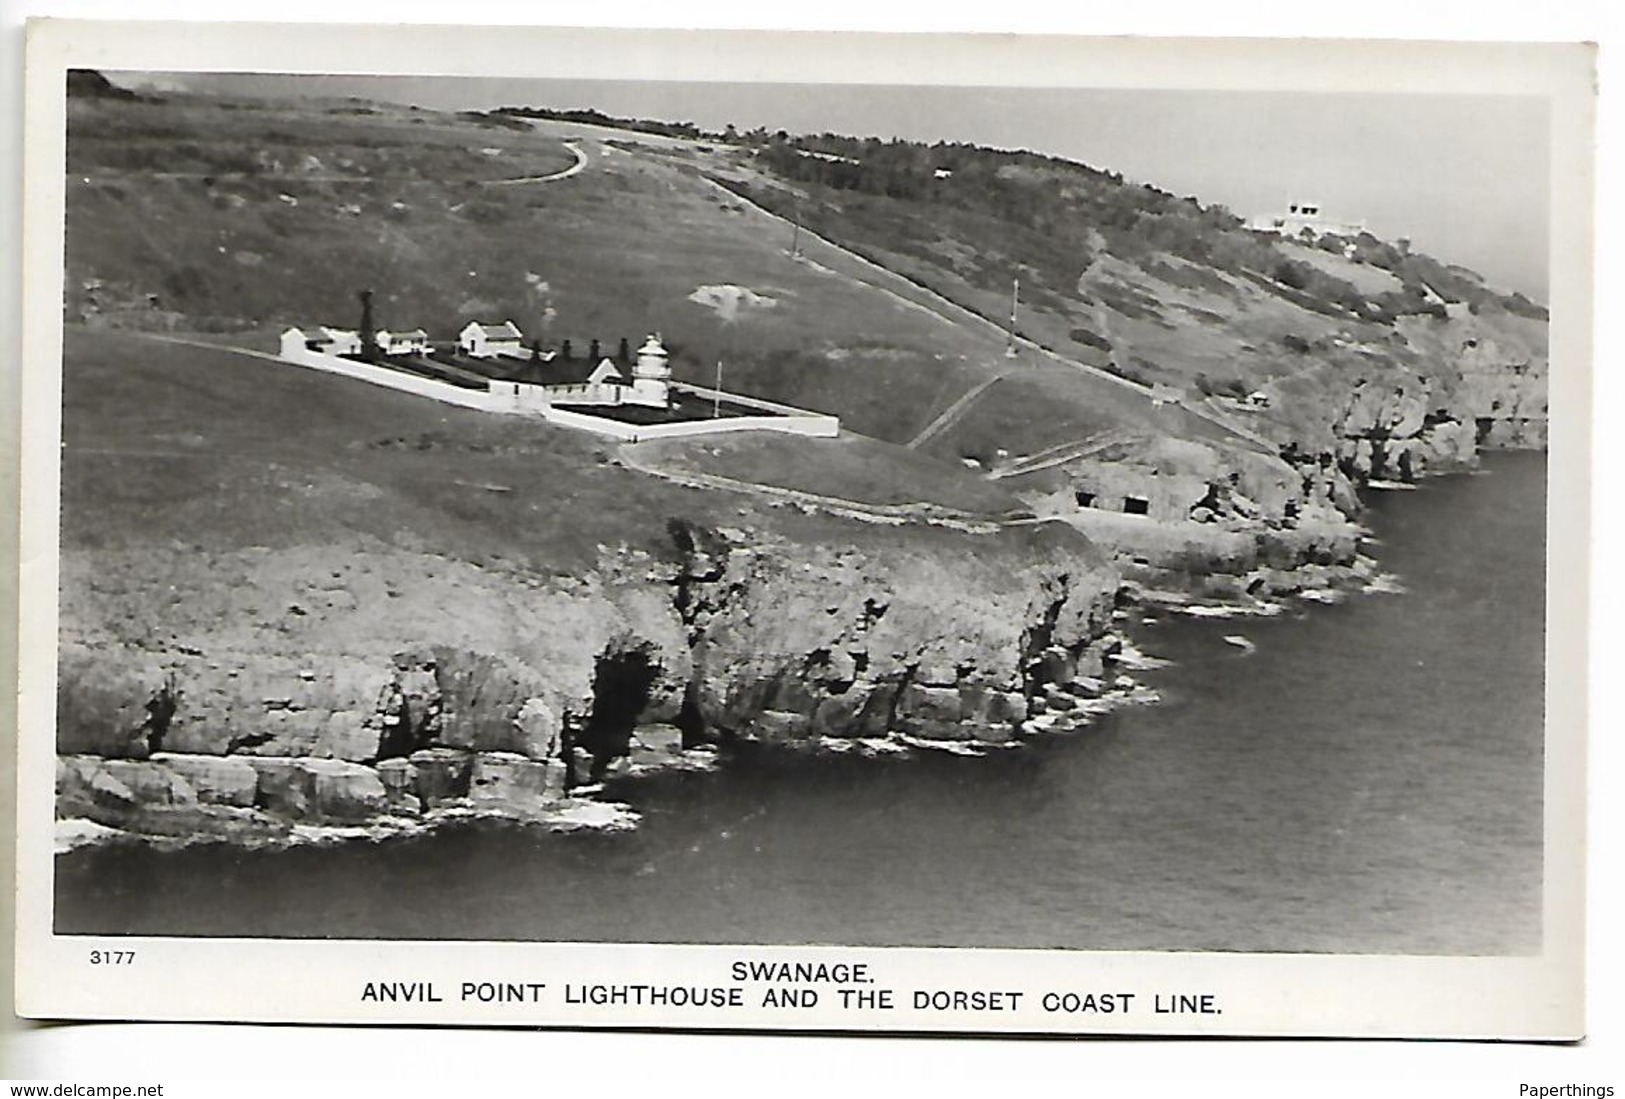 Real Photo Postcard, Swanage Anvil Point Lighthouse, And The Dorset Coastline. Air Photograph. - Swanage